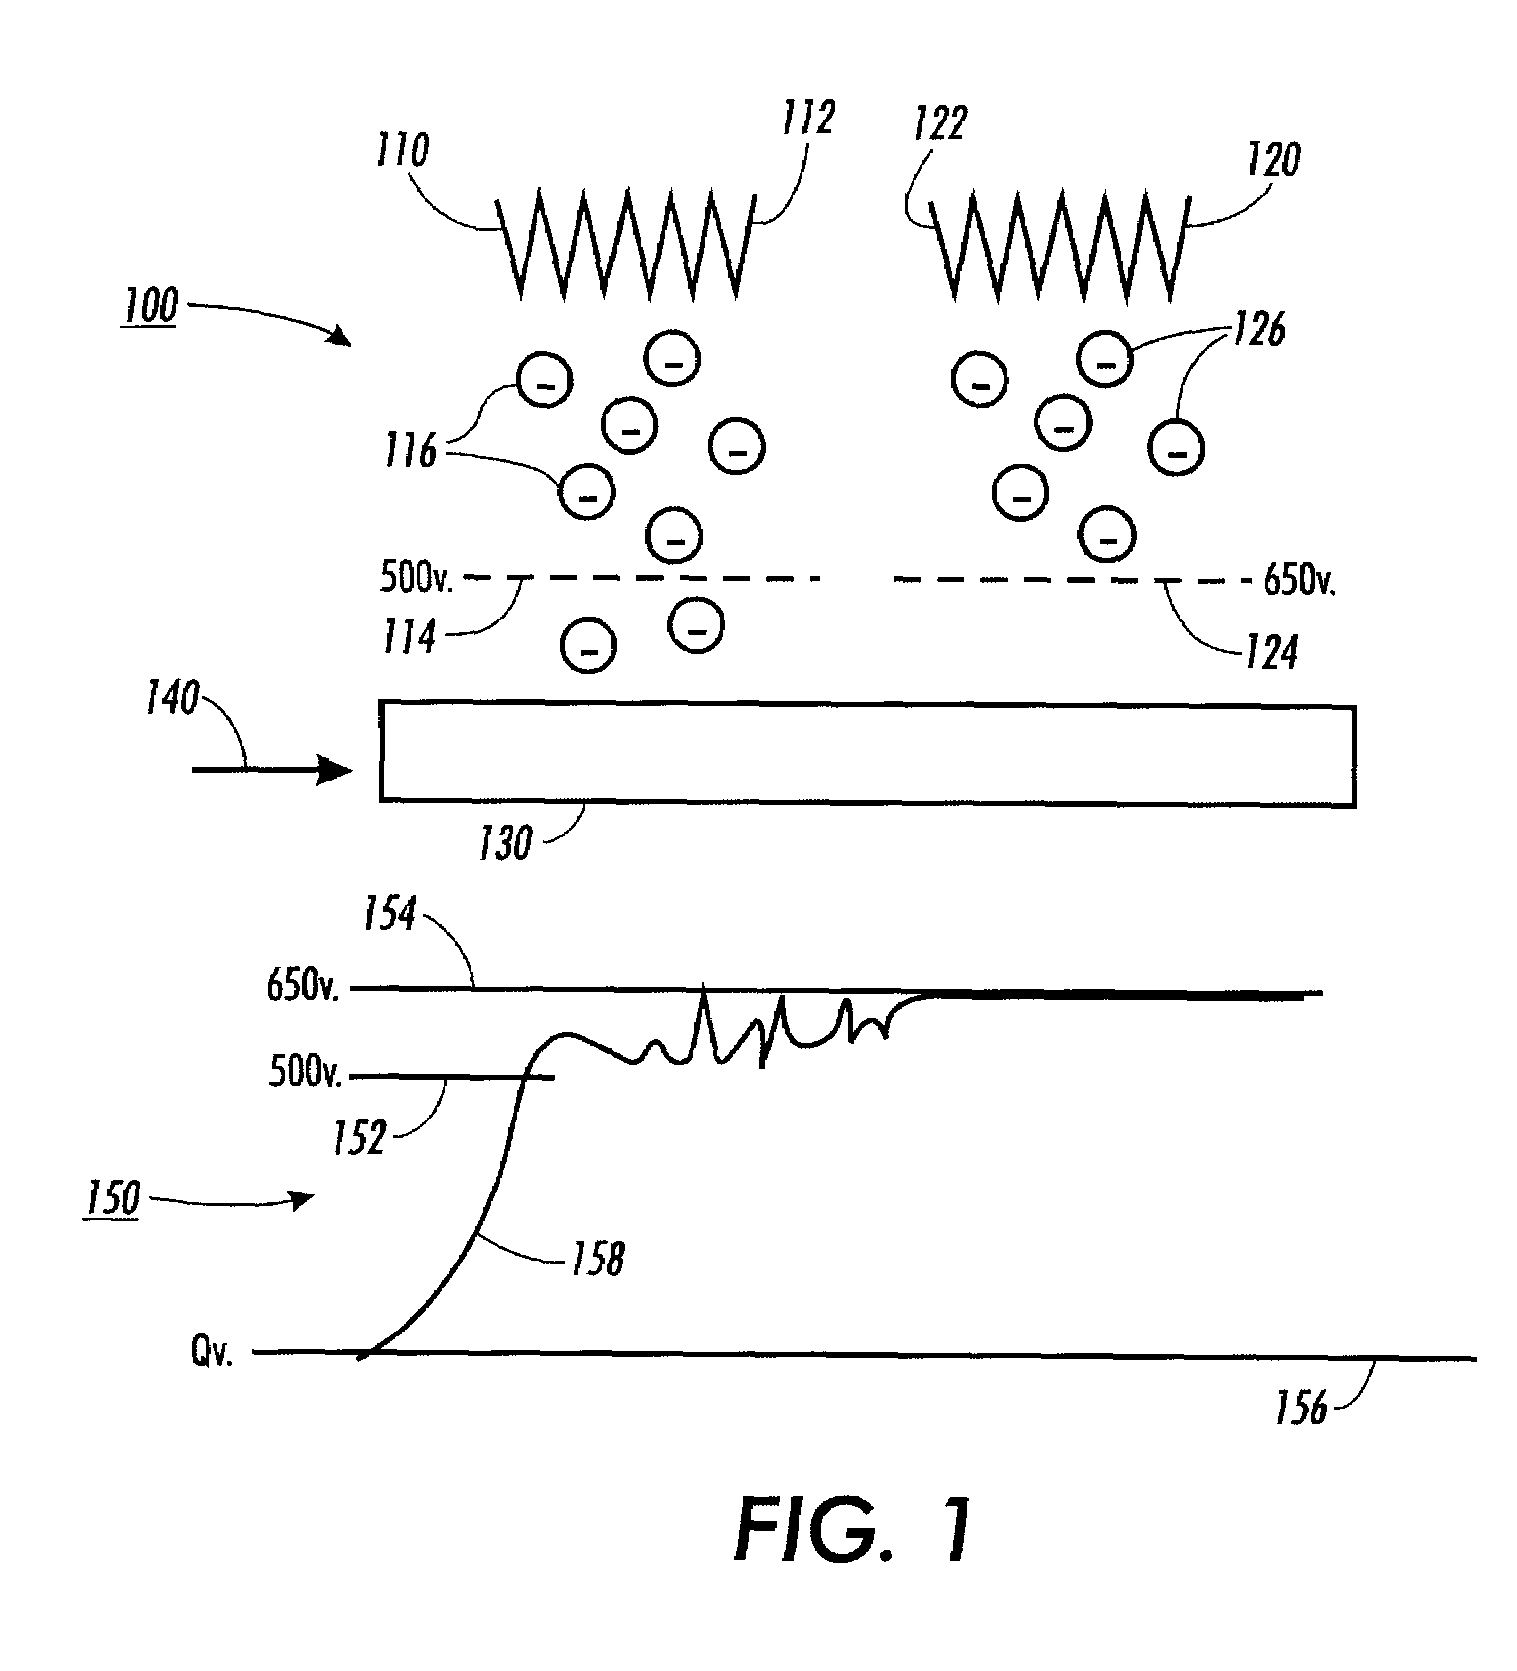 Systems and methods for setting up grid voltages in a tandem pin charging device